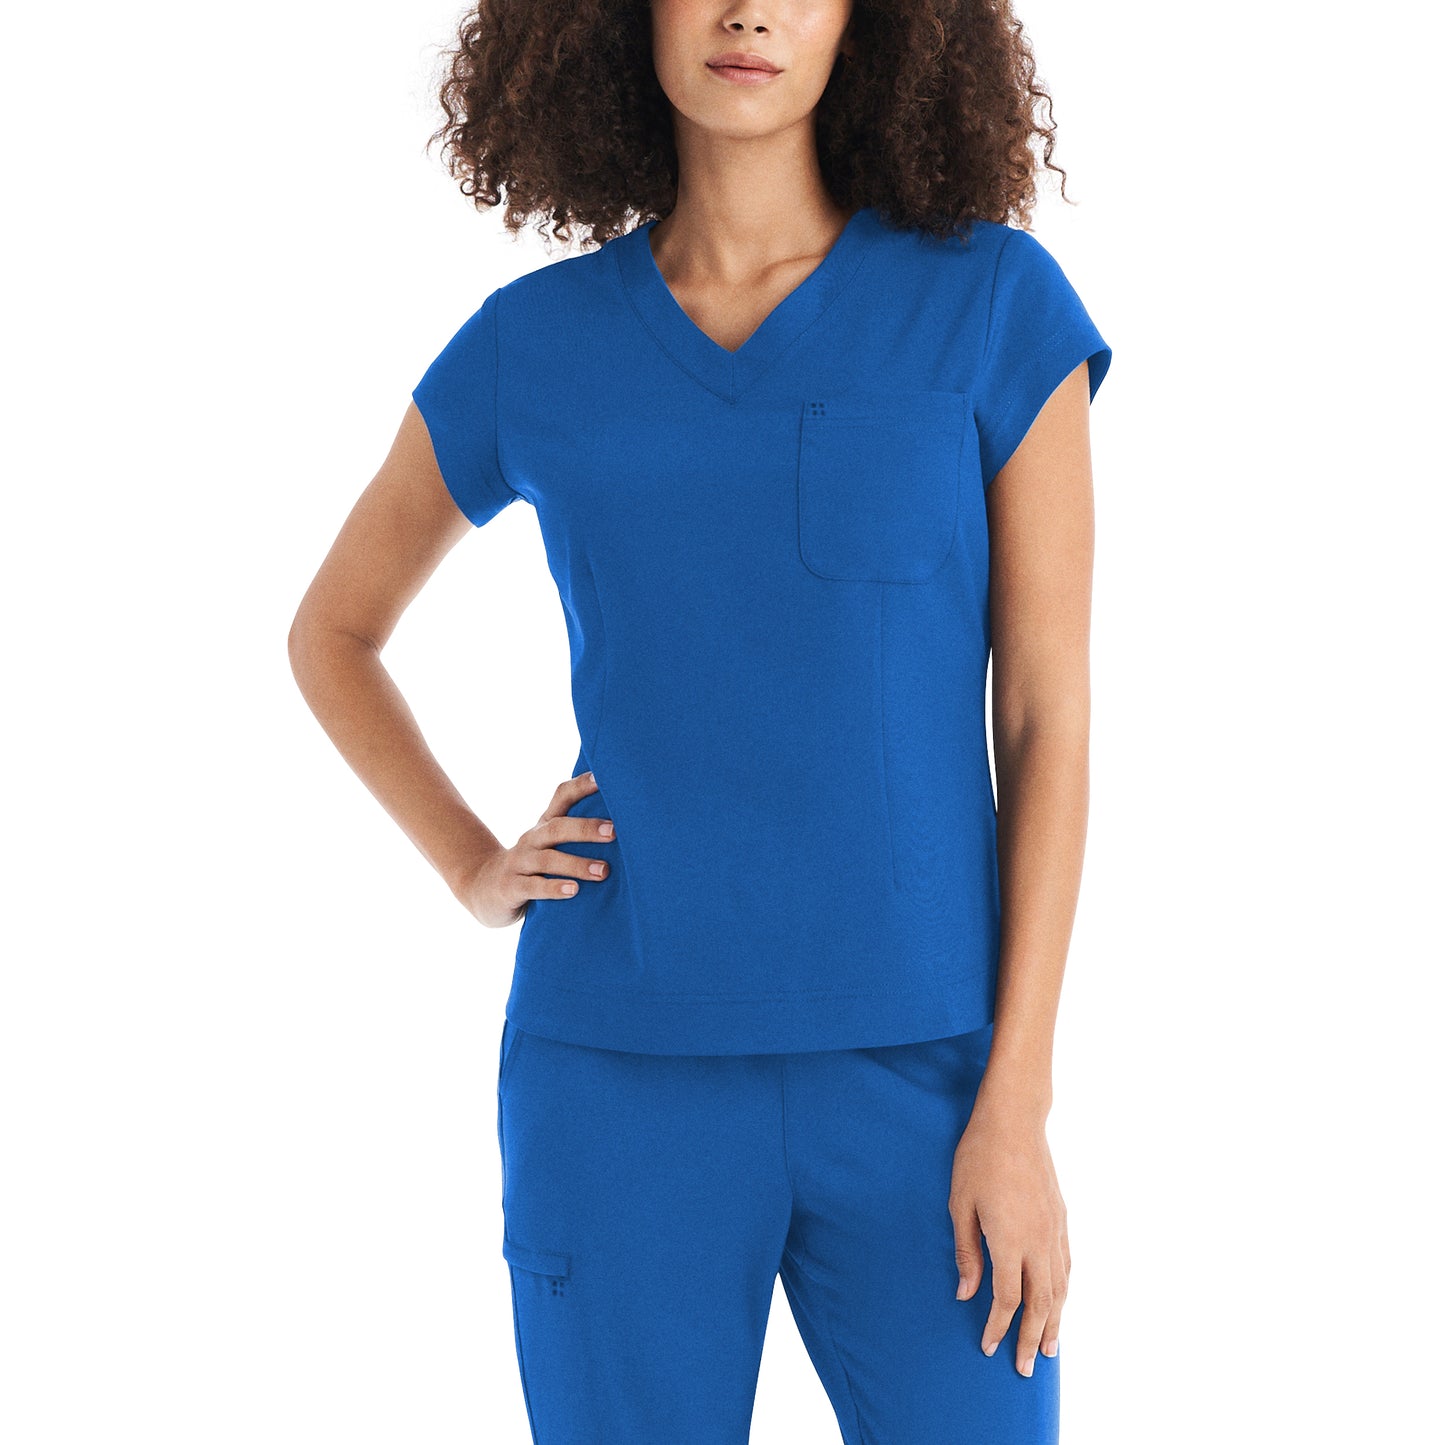 Women's V-neck top with a chest pocket - CRFT -  WC 128H